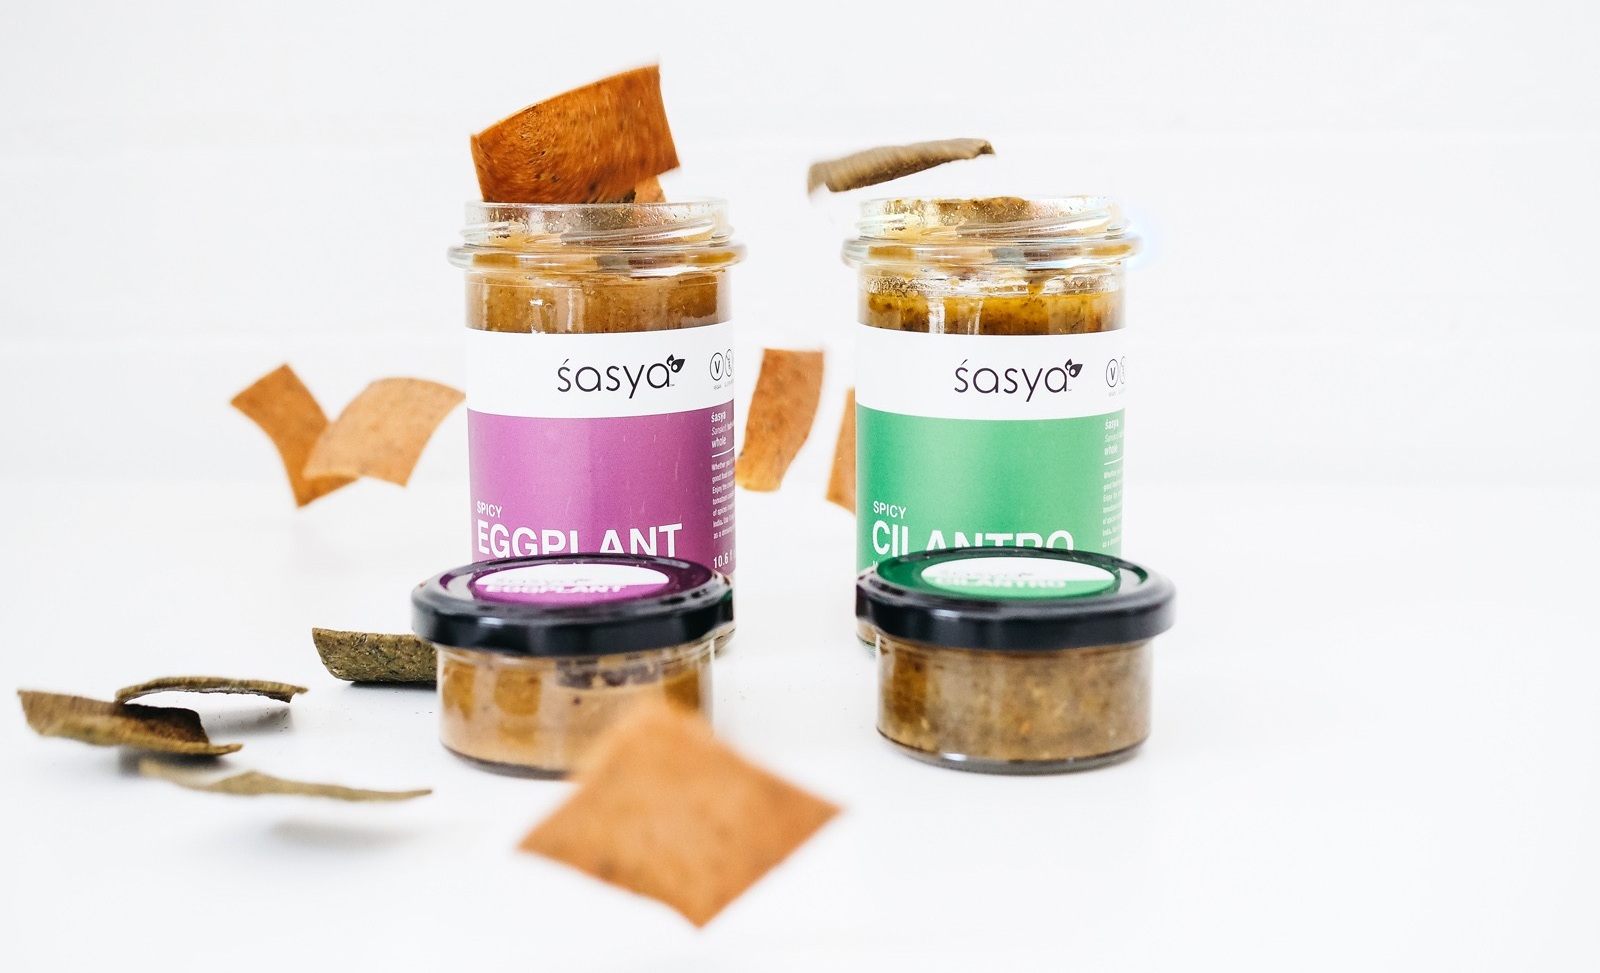 Sasya’s line of heathy Indian snack foods include rice lentil chips and eggplant, peanut coconut, and cilantro dips.